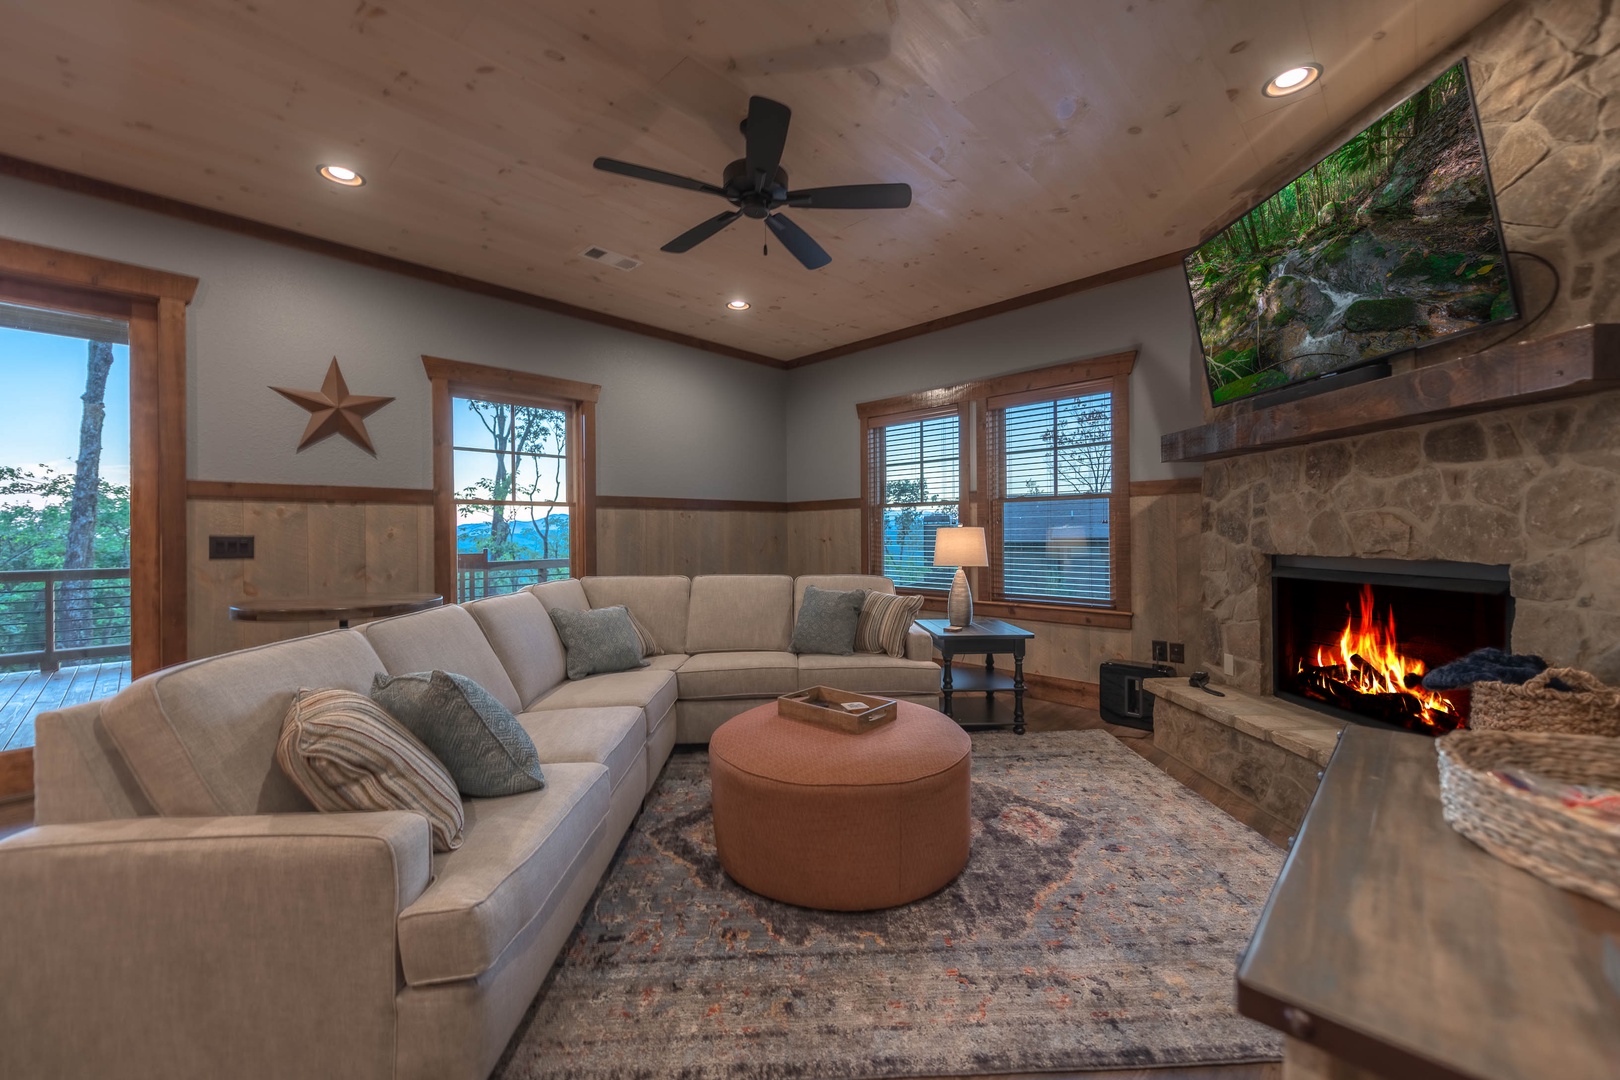 Southern Star- Lower level living room area with large fireplace and TV